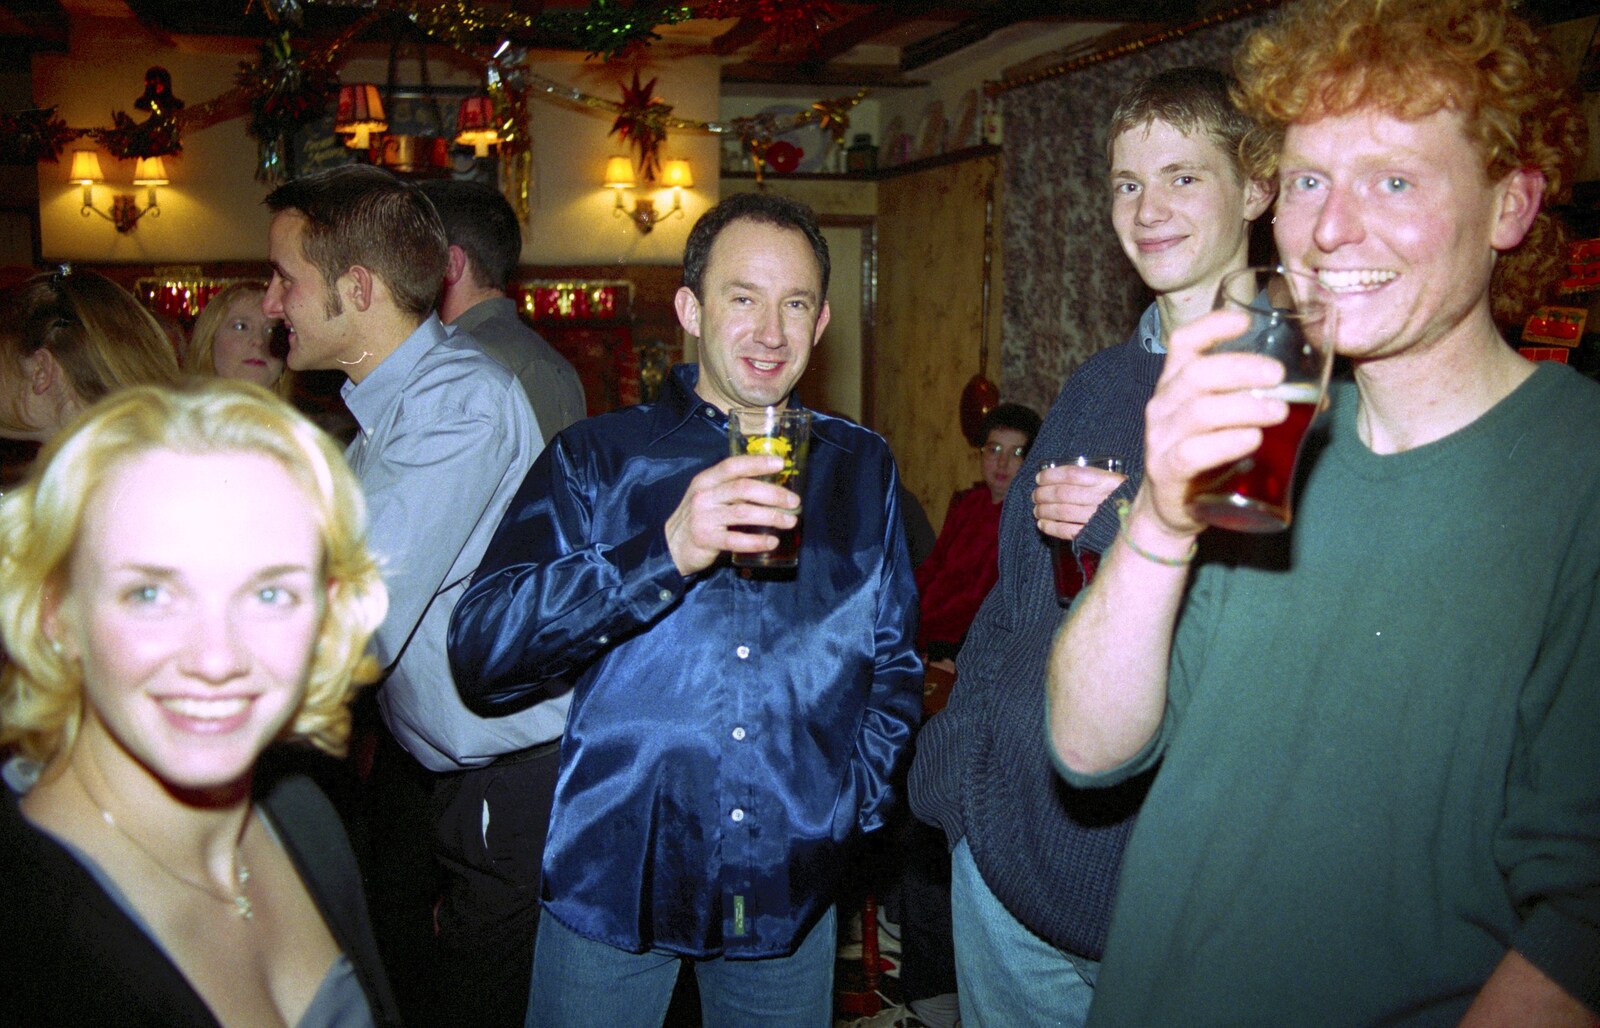 Emma, DH, The Boy Phil and Wavy from New Year's Eve at The Swan Inn, Brome, Suffolk - 31st December 1999